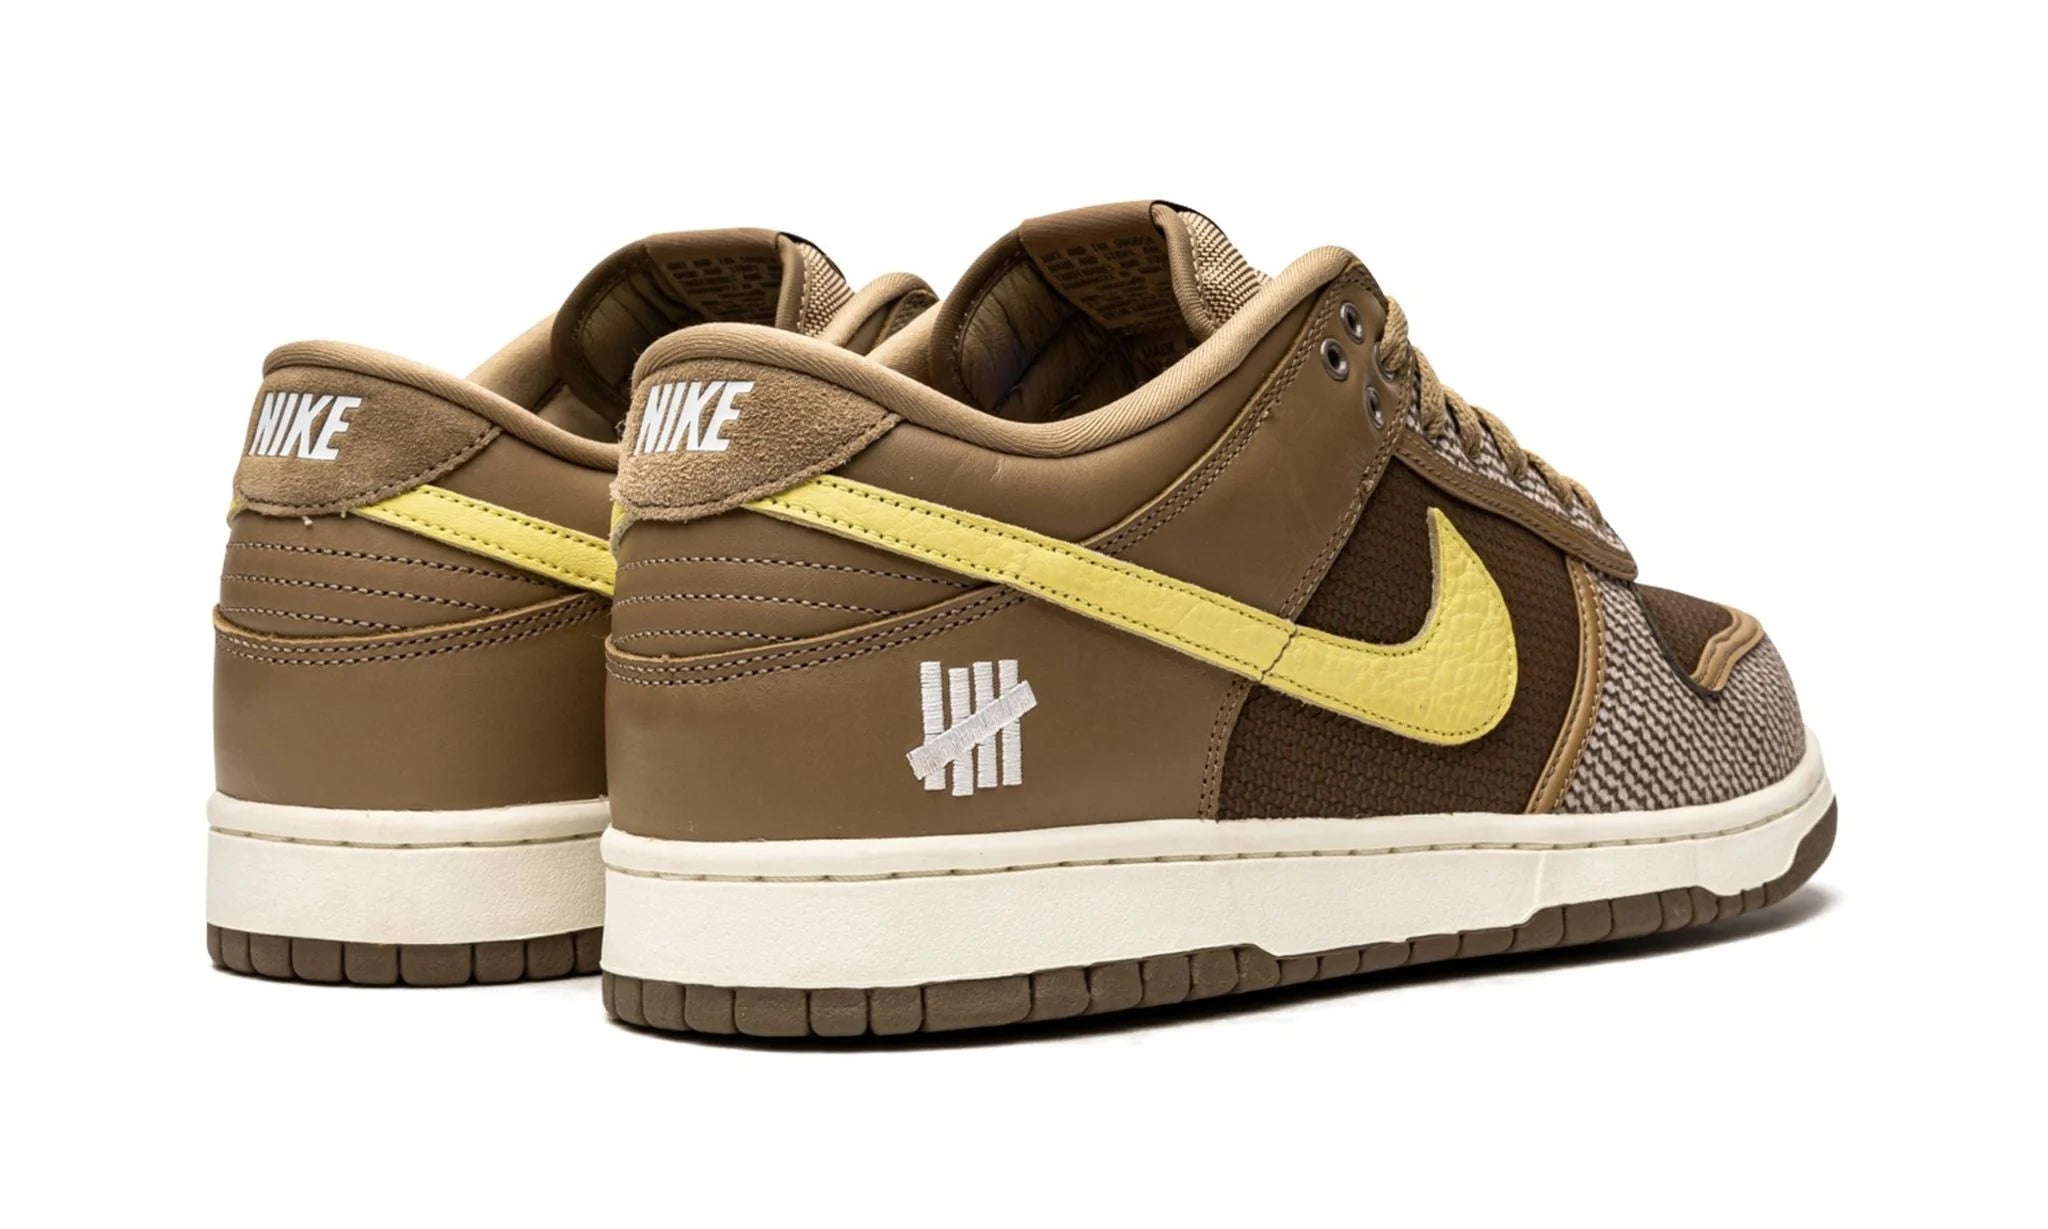 Nike Dunk Low SP Undefeated Canteen Dunk vs. AF1 Pack - Dunk Low - Pirri